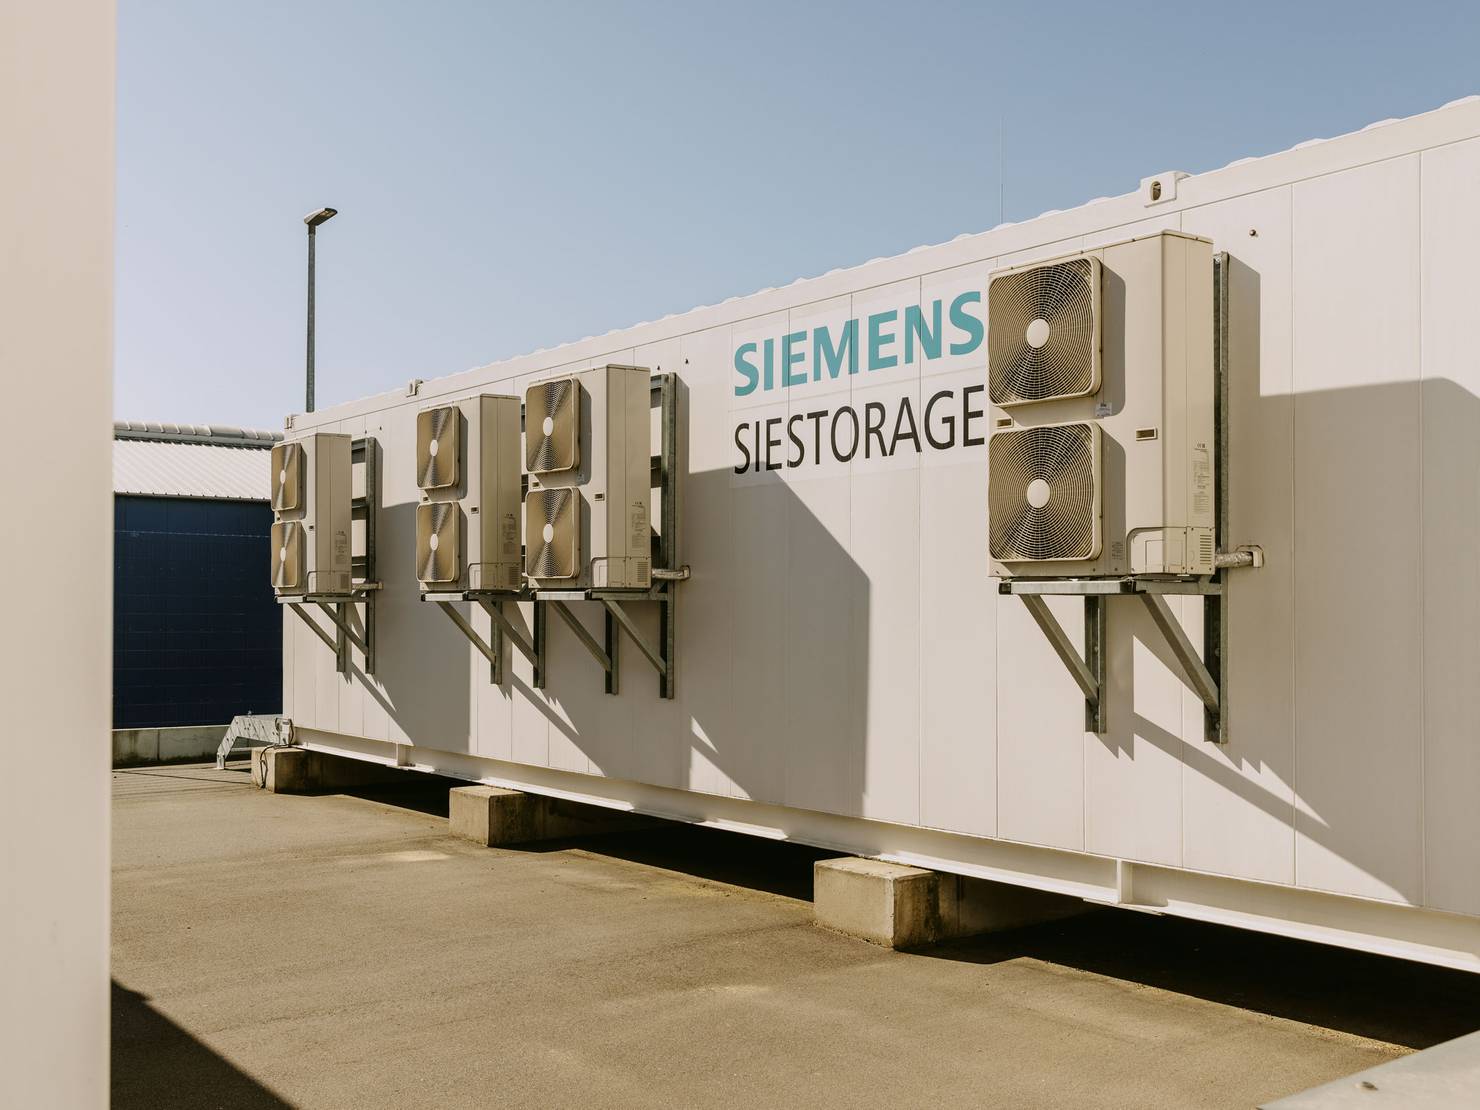 Siemens’ storage solution helps to save energy for when it is needed